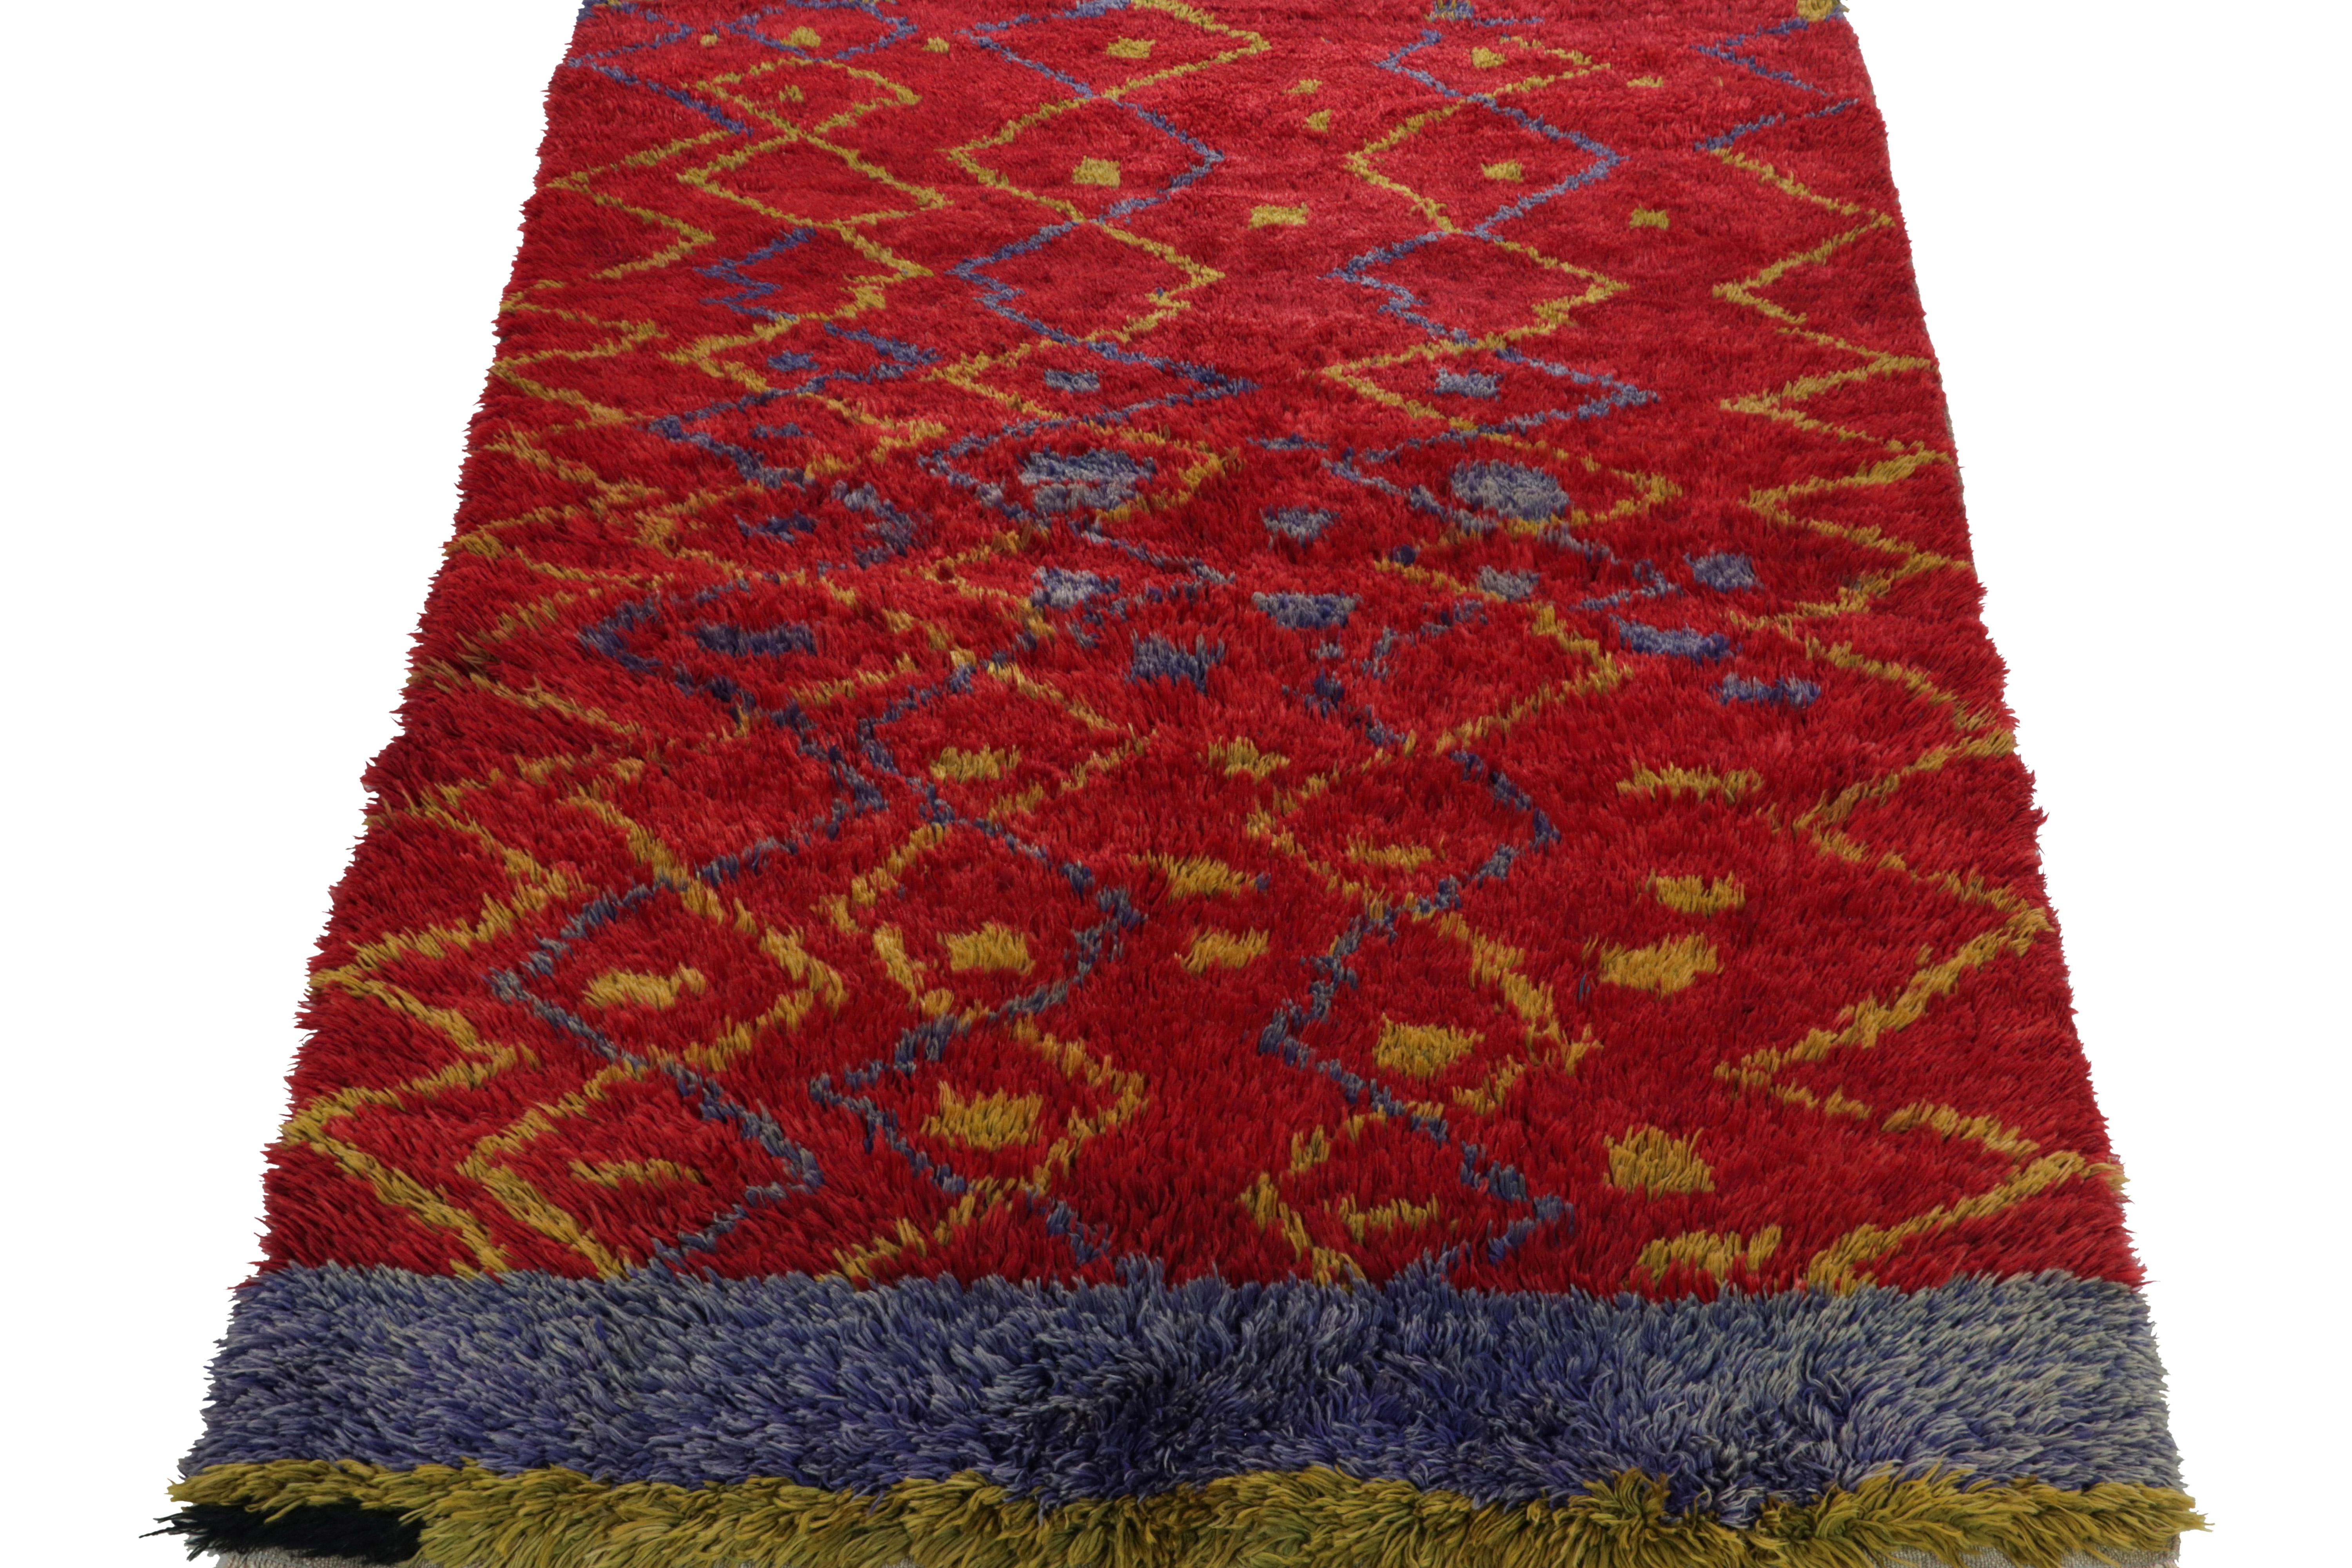 A vintage Tulu runner from Turkey circa 1950-1960, carrying a luscious pile in bright red boldly supporting a defined geometric pattern in green & ink blue tones. The tribal frame enjoys stripes of color on the border further complementing the